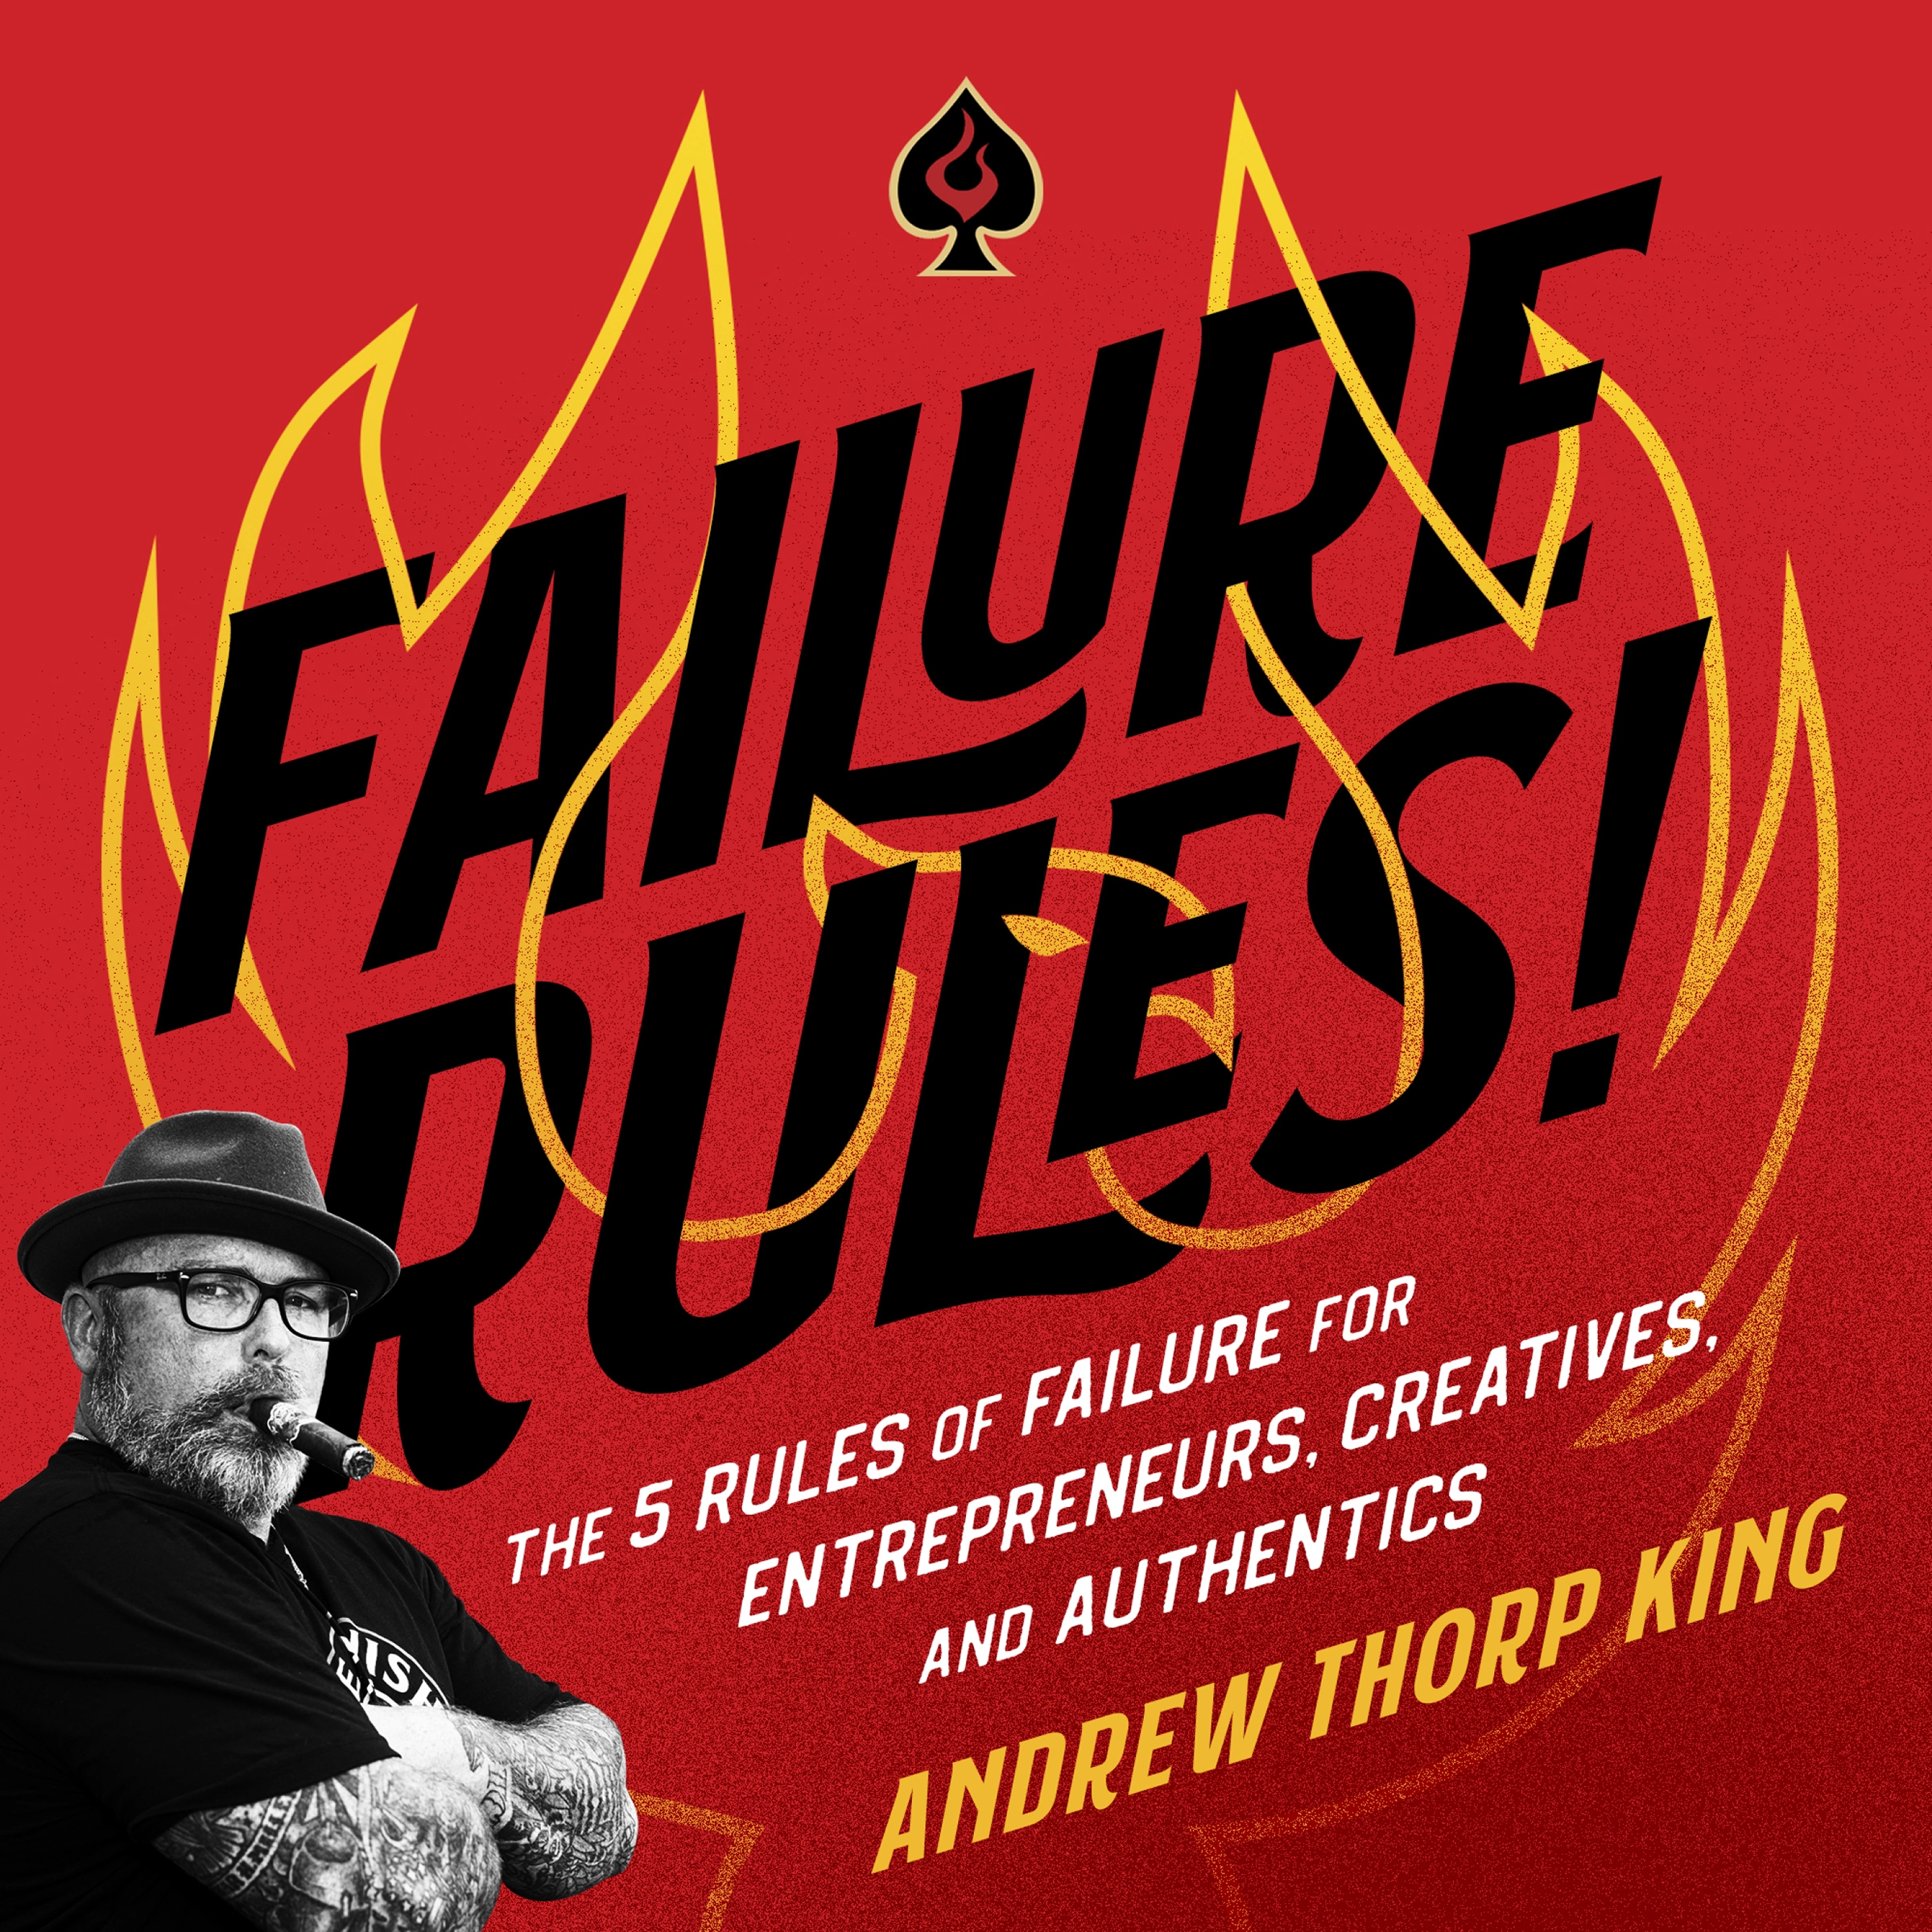 FAILURE RULES! Audiobook by Andrew Thorp King